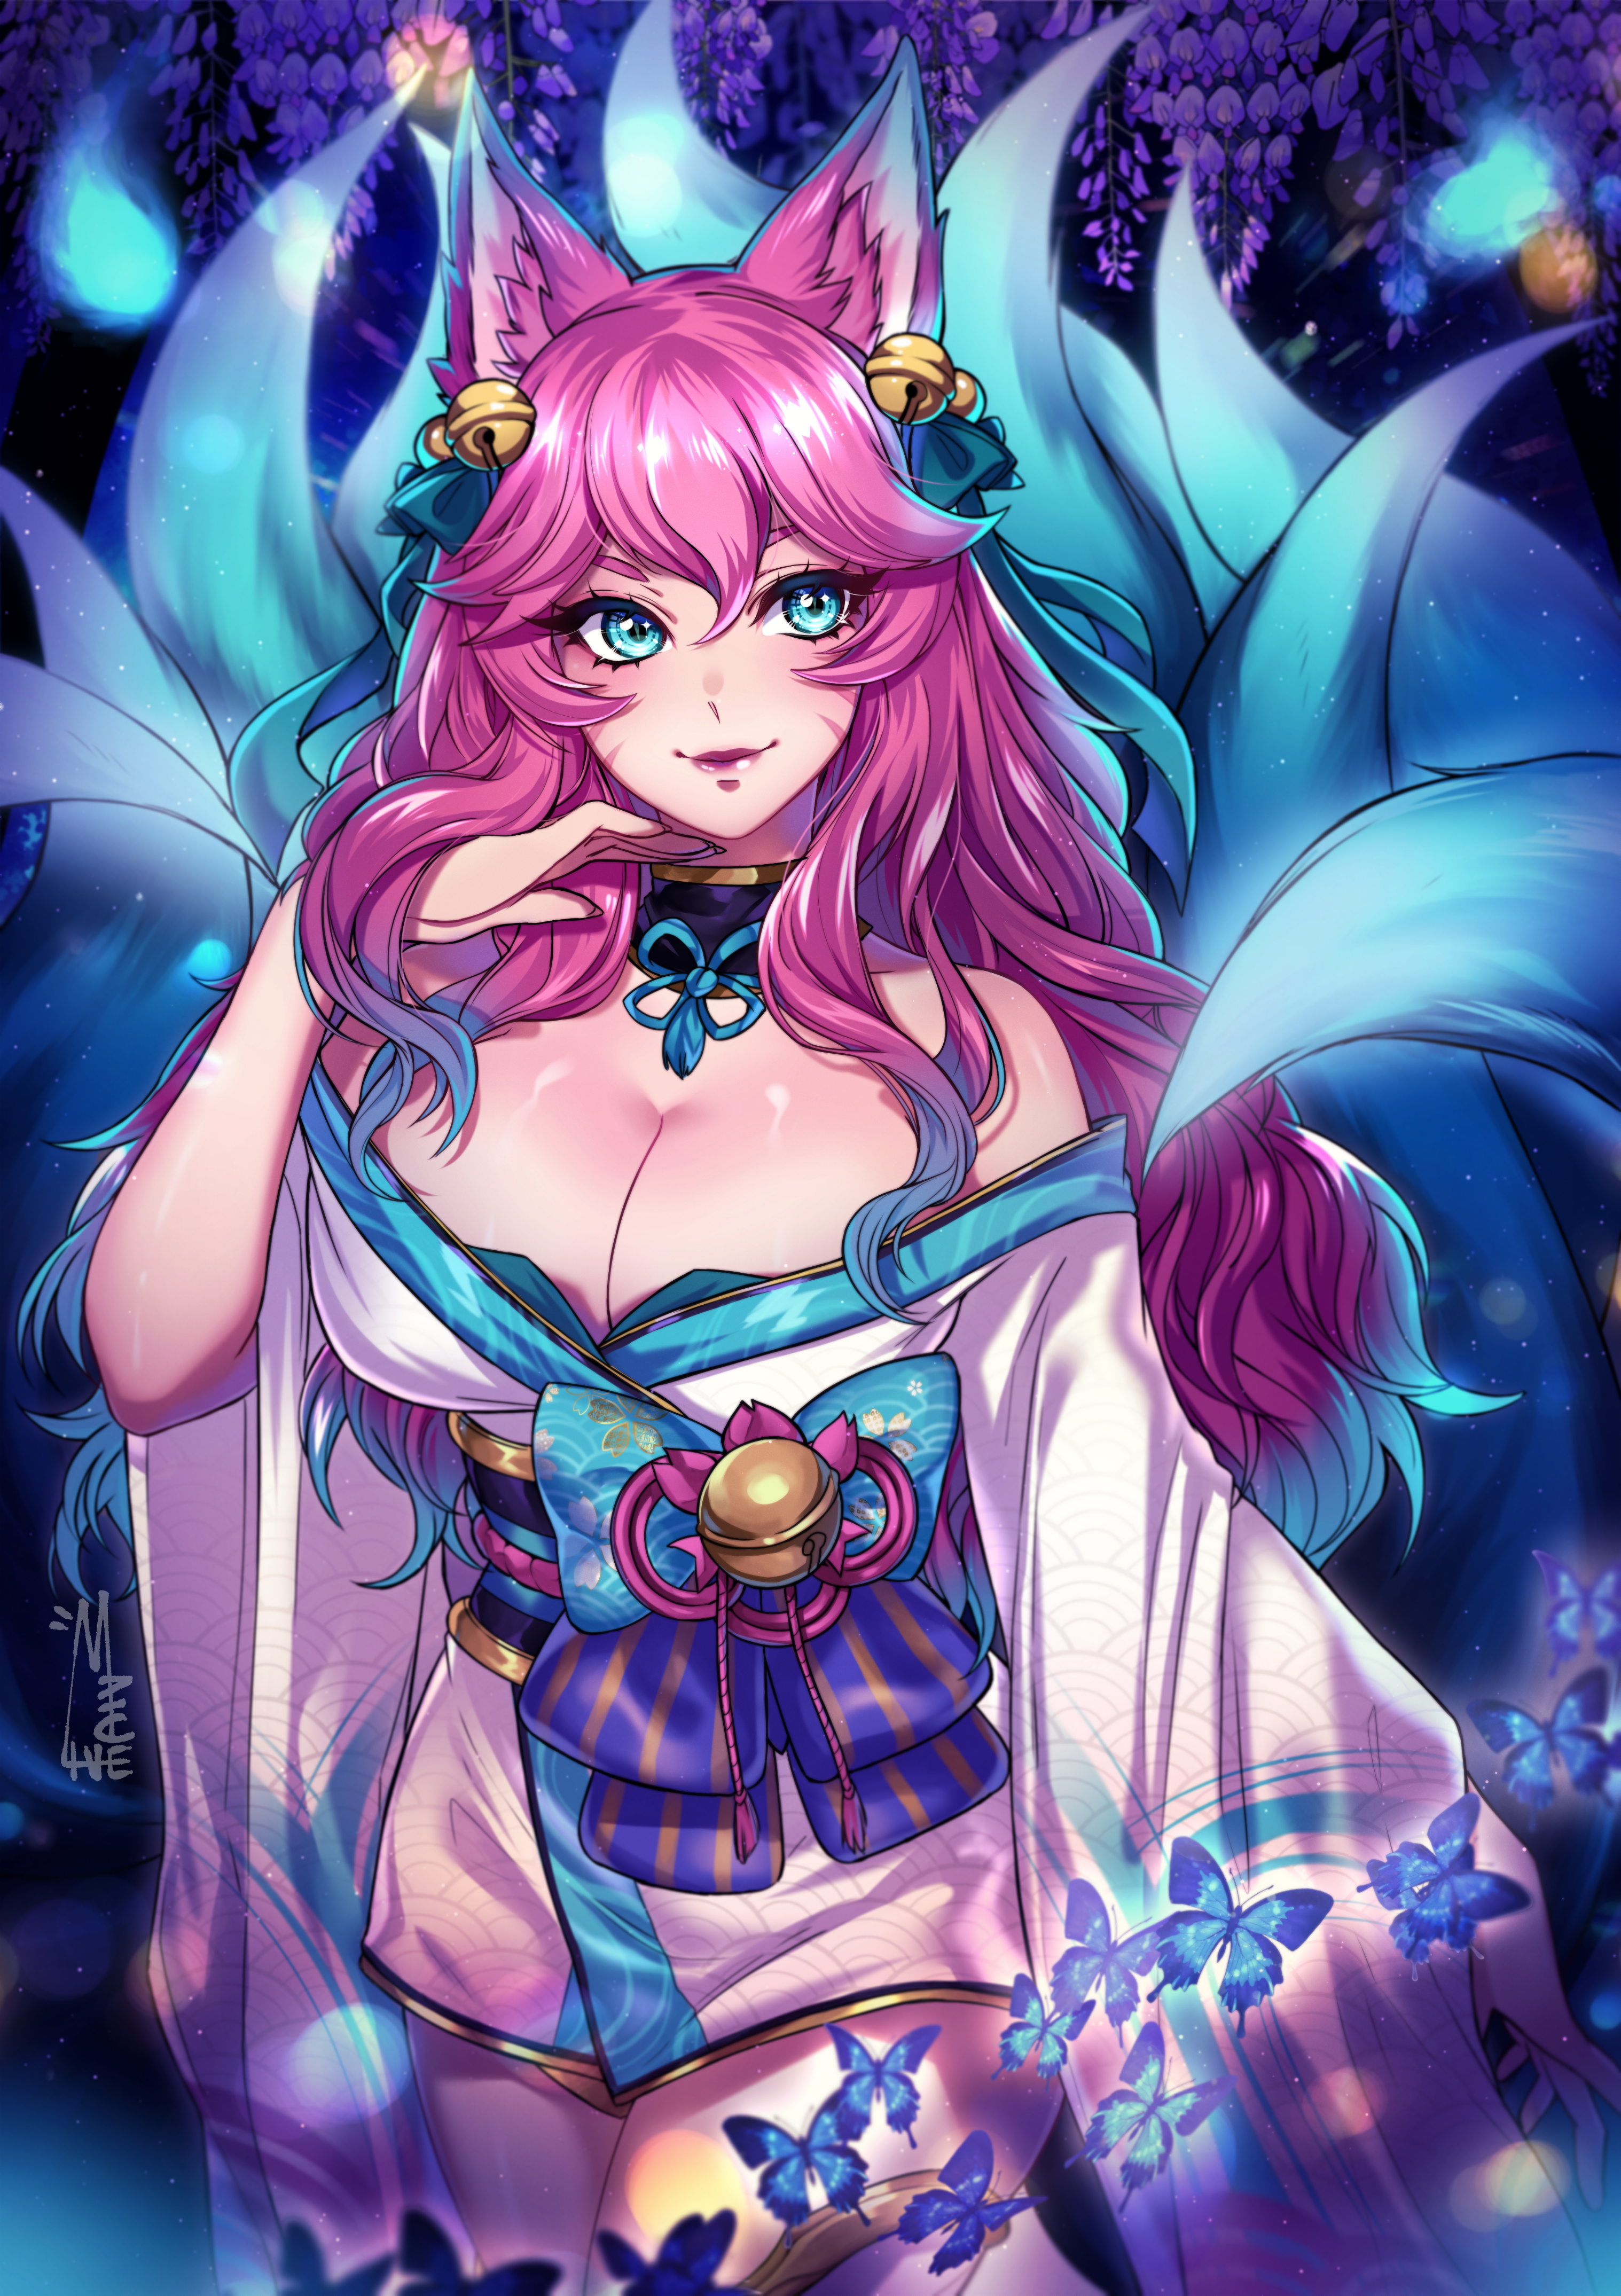 Source. ahri and spirit blossom ahri (league of legends) drawn by maiulive....